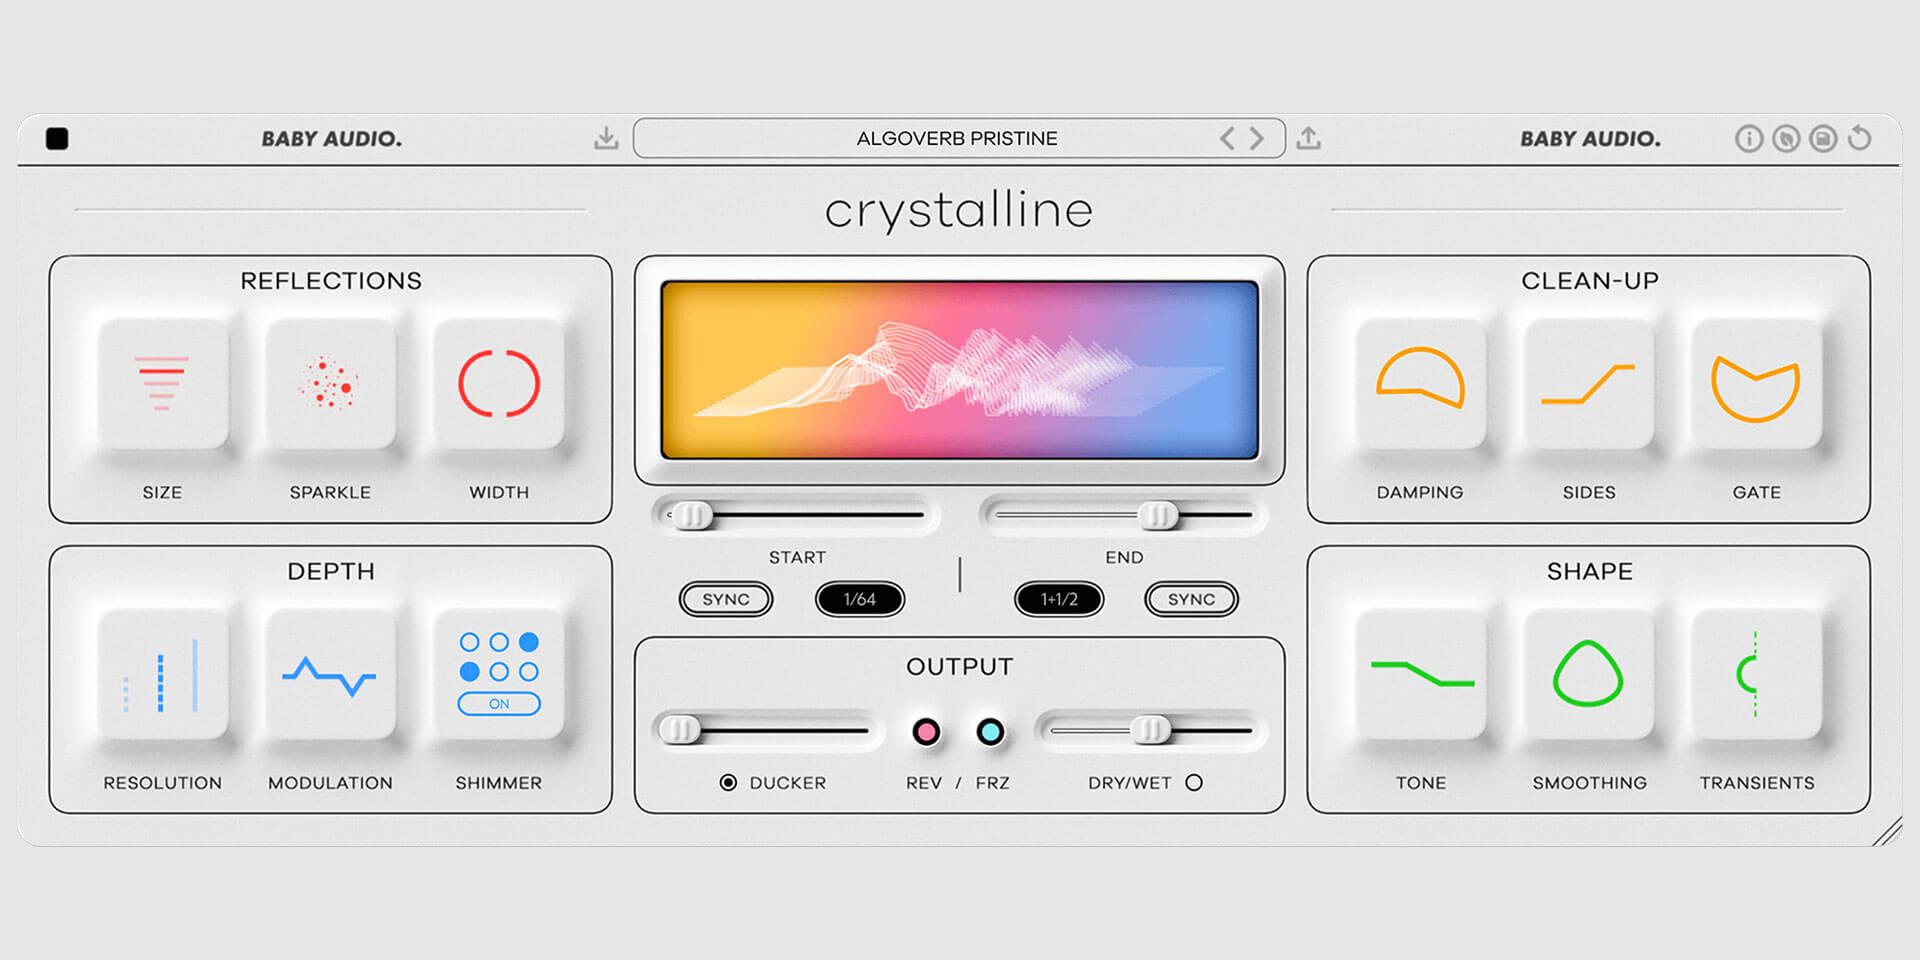 Baby Audio Crystalline review